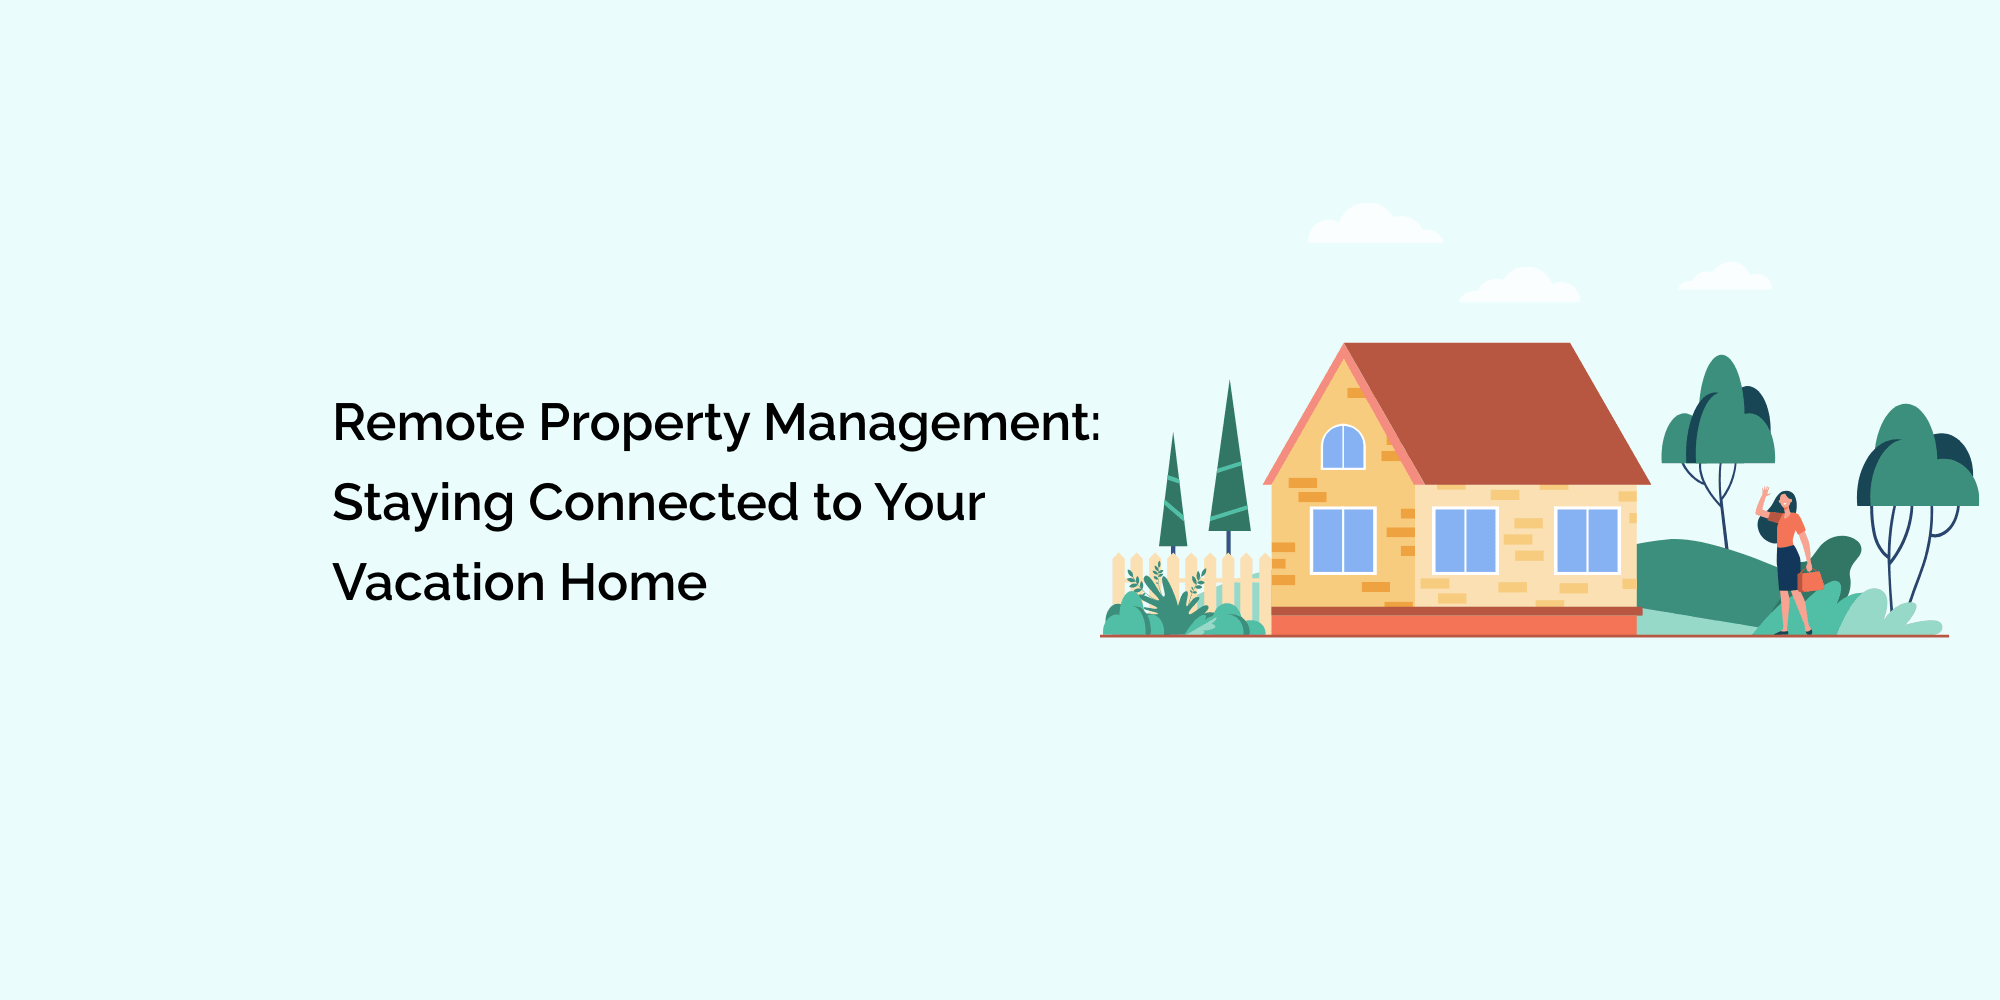 Remote Property Management: Staying Connected to Your Vacation Home